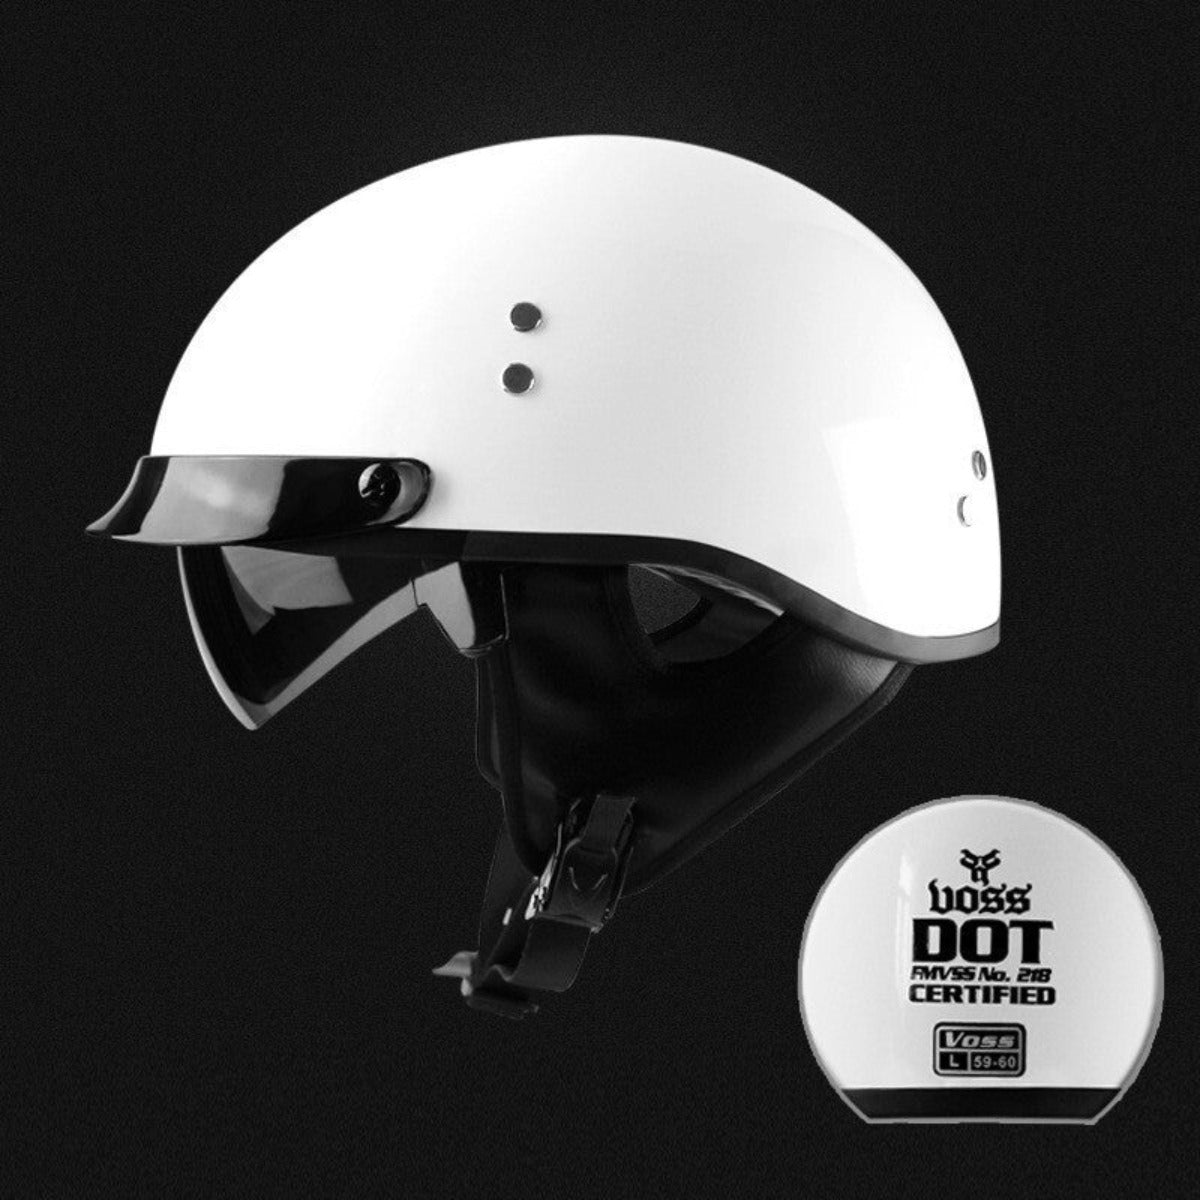 A stylish white motorcycle helmet on a black background, ensuring safety with its D.O.T Certified Vintage Half Face Biker Helmet status.